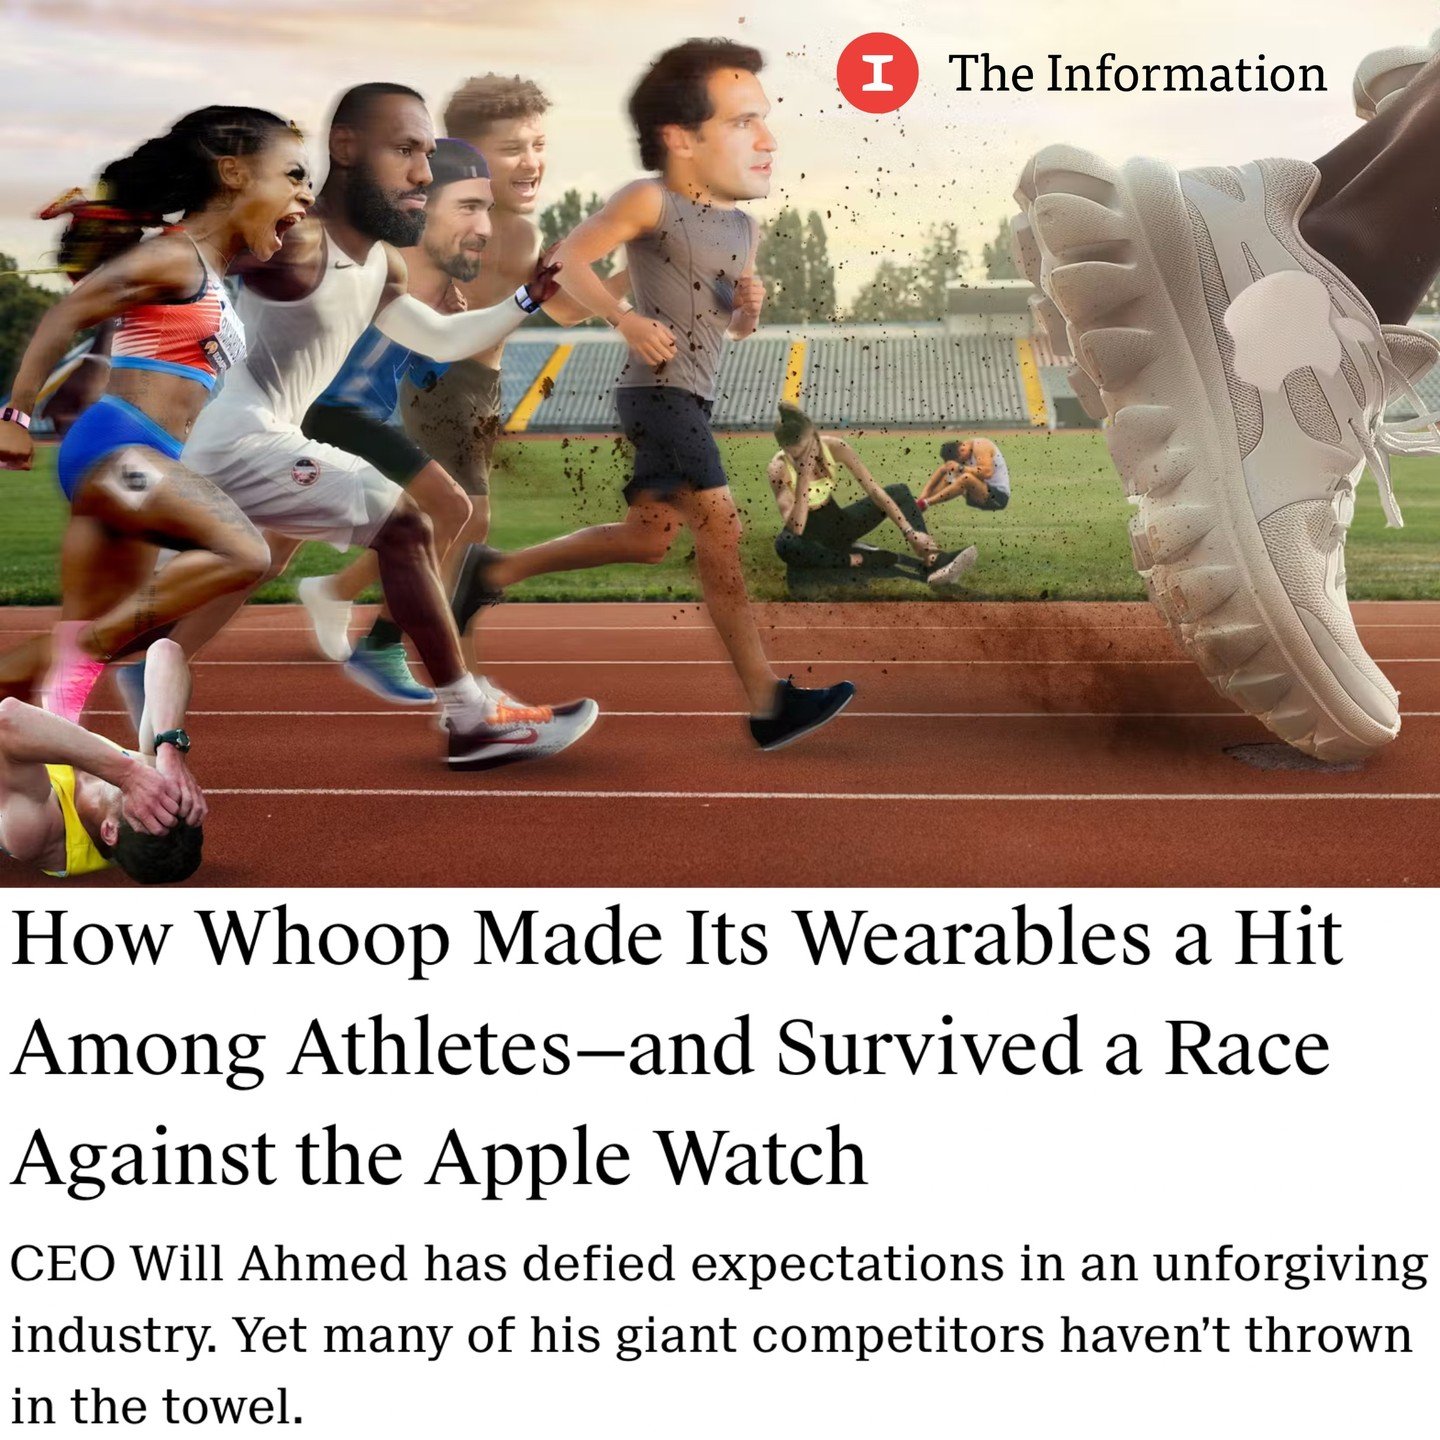 @theinformation sat down with @whoop Founder and CEO @willahmed for a deep dive on the last 12 years building and differentiating @whoop within a highly competitive wearable market, alongside his daily wellness routine and life hacks to fuel such per